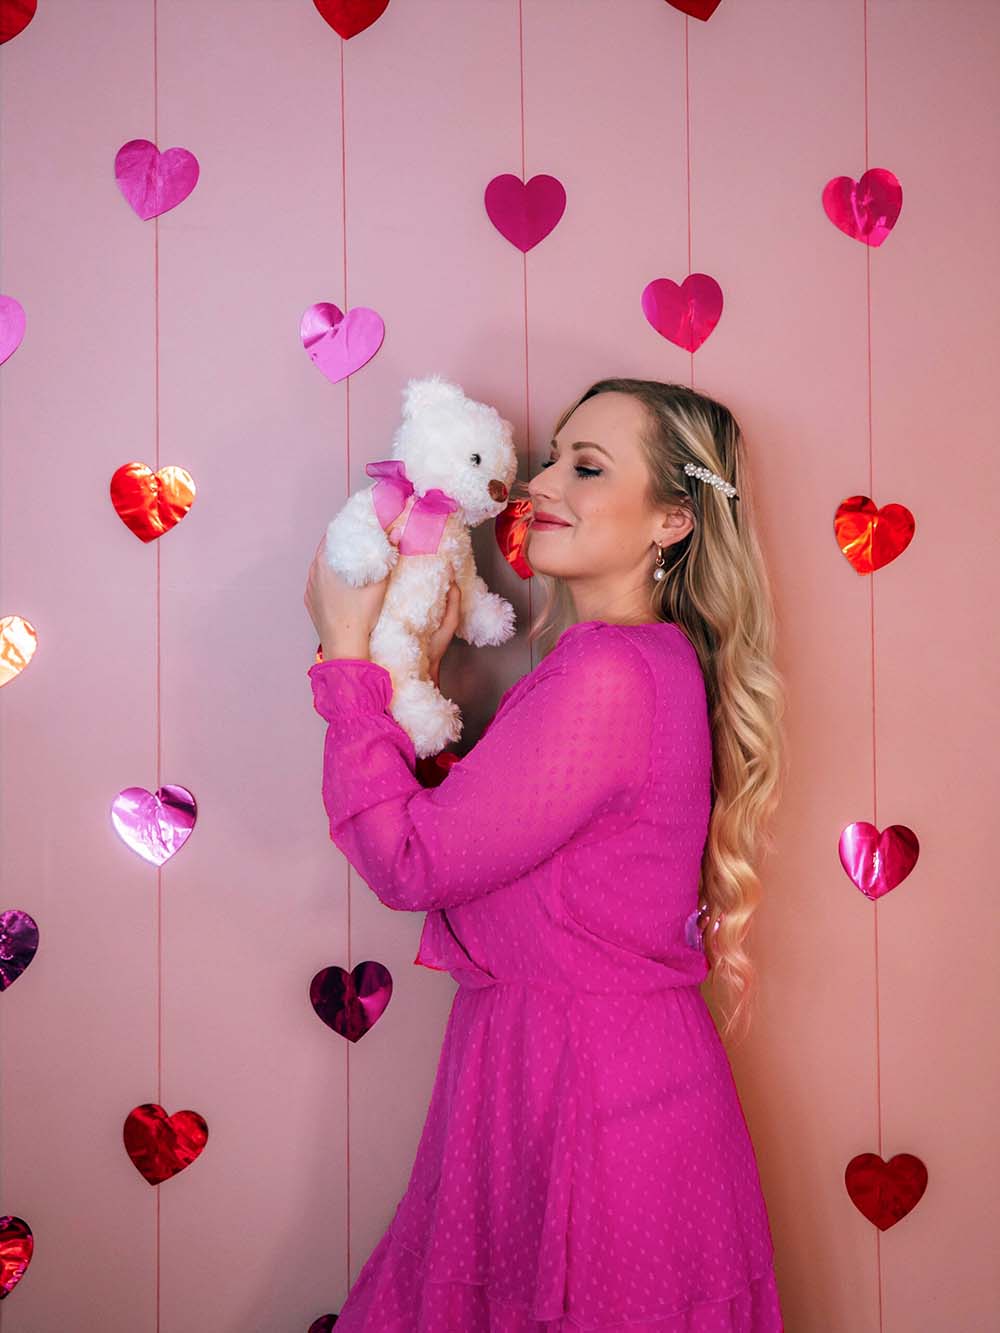 Looking for some fun & creative solo Valentine's Day photoshoot ideas to celebrate you and add a little pink and red to your instagram? This is for you! I've compiled a guide of easy Valentine's day photo ideas you can shoot at home by yourself. All of these ideas involve affordable props and are great for all photography levels. Pictured here: Add heart garlands to your wall and shoot with a teddy bear